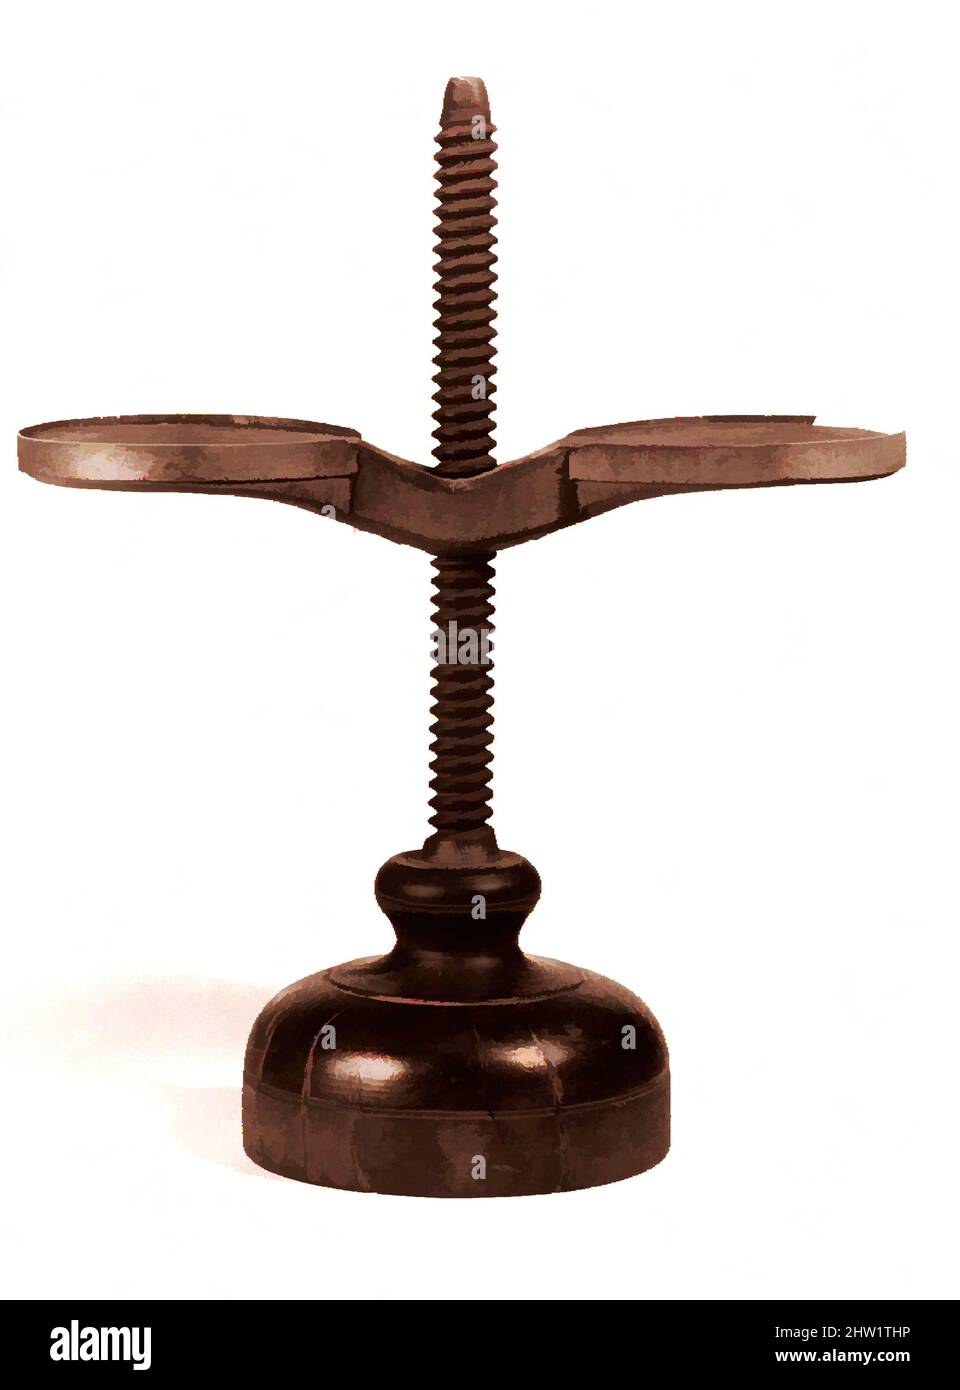 Art inspired by Candle Stand, 1800–1840, Made in New Lebanon, New York, United States, American, Shaker, Maple, basswood, 16 1/4 x 13 1/4 x 6 7/16 in. (41.3 x 33.7 x 16.4 cm), Furniture, Classic works modernized by Artotop with a splash of modernity. Shapes, color and value, eye-catching visual impact on art. Emotions through freedom of artworks in a contemporary way. A timeless message pursuing a wildly creative new direction. Artists turning to the digital medium and creating the Artotop NFT Stock Photo